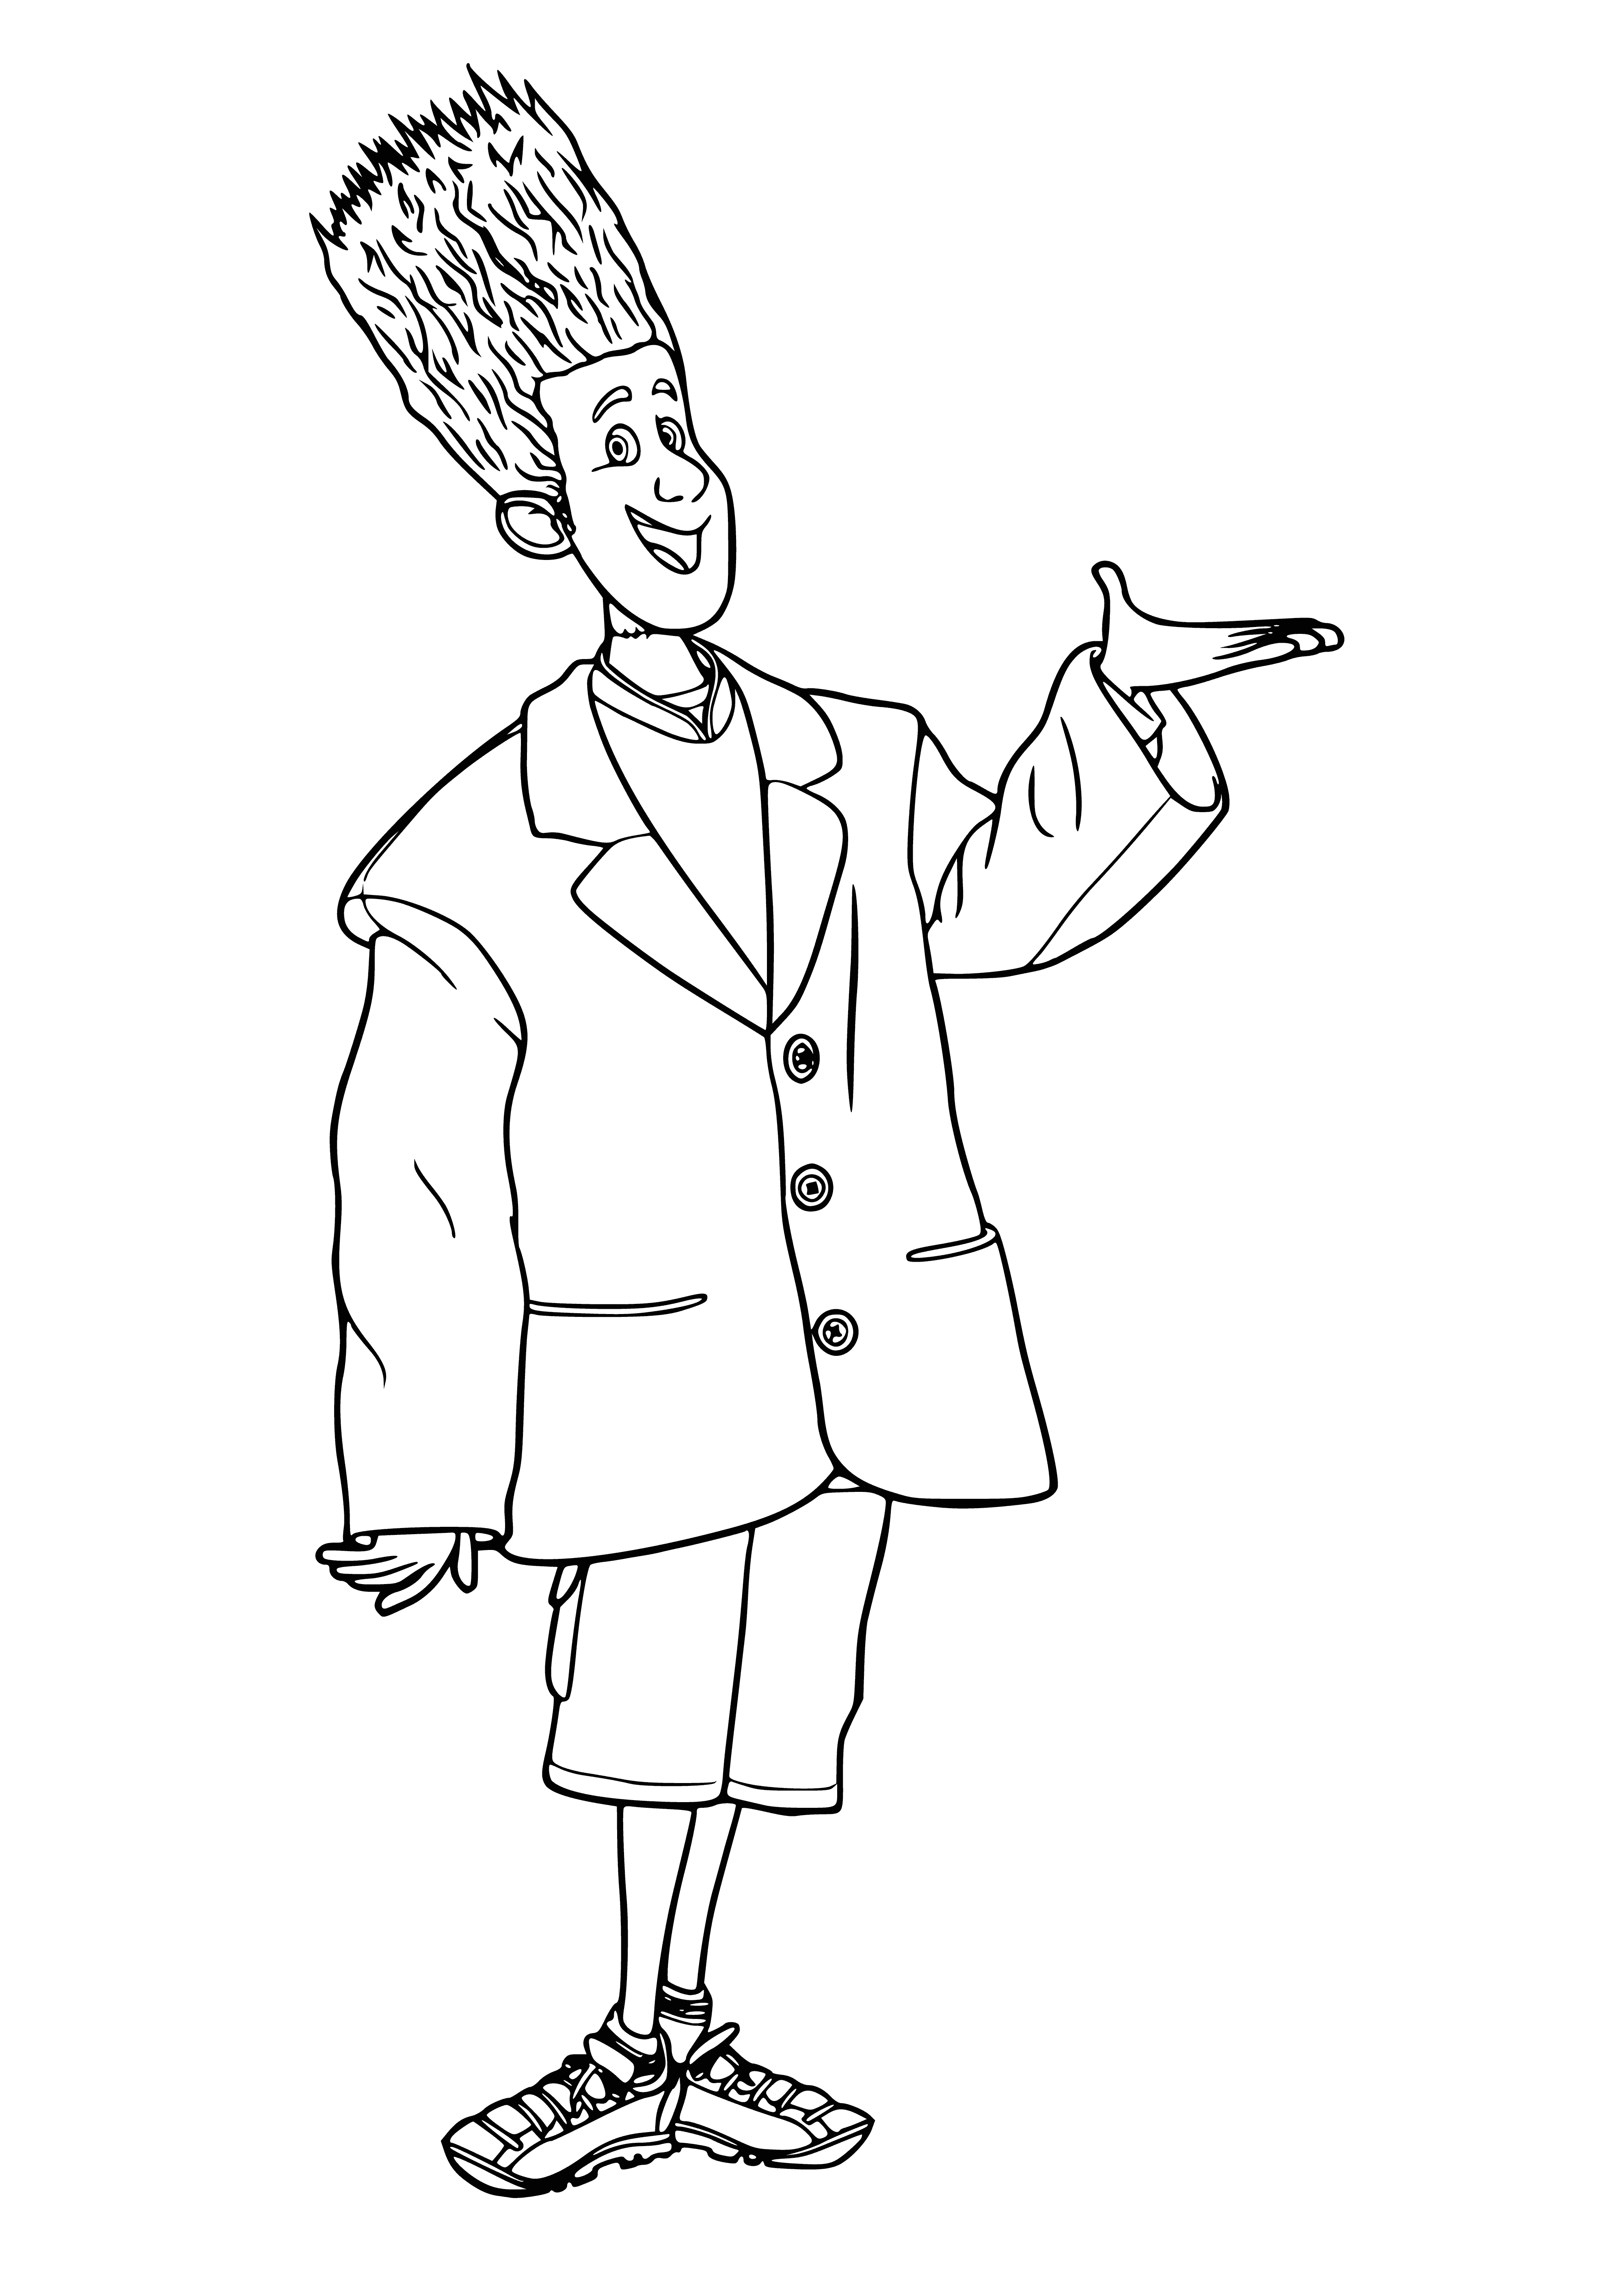 Jonathan in a monster costume coloring page